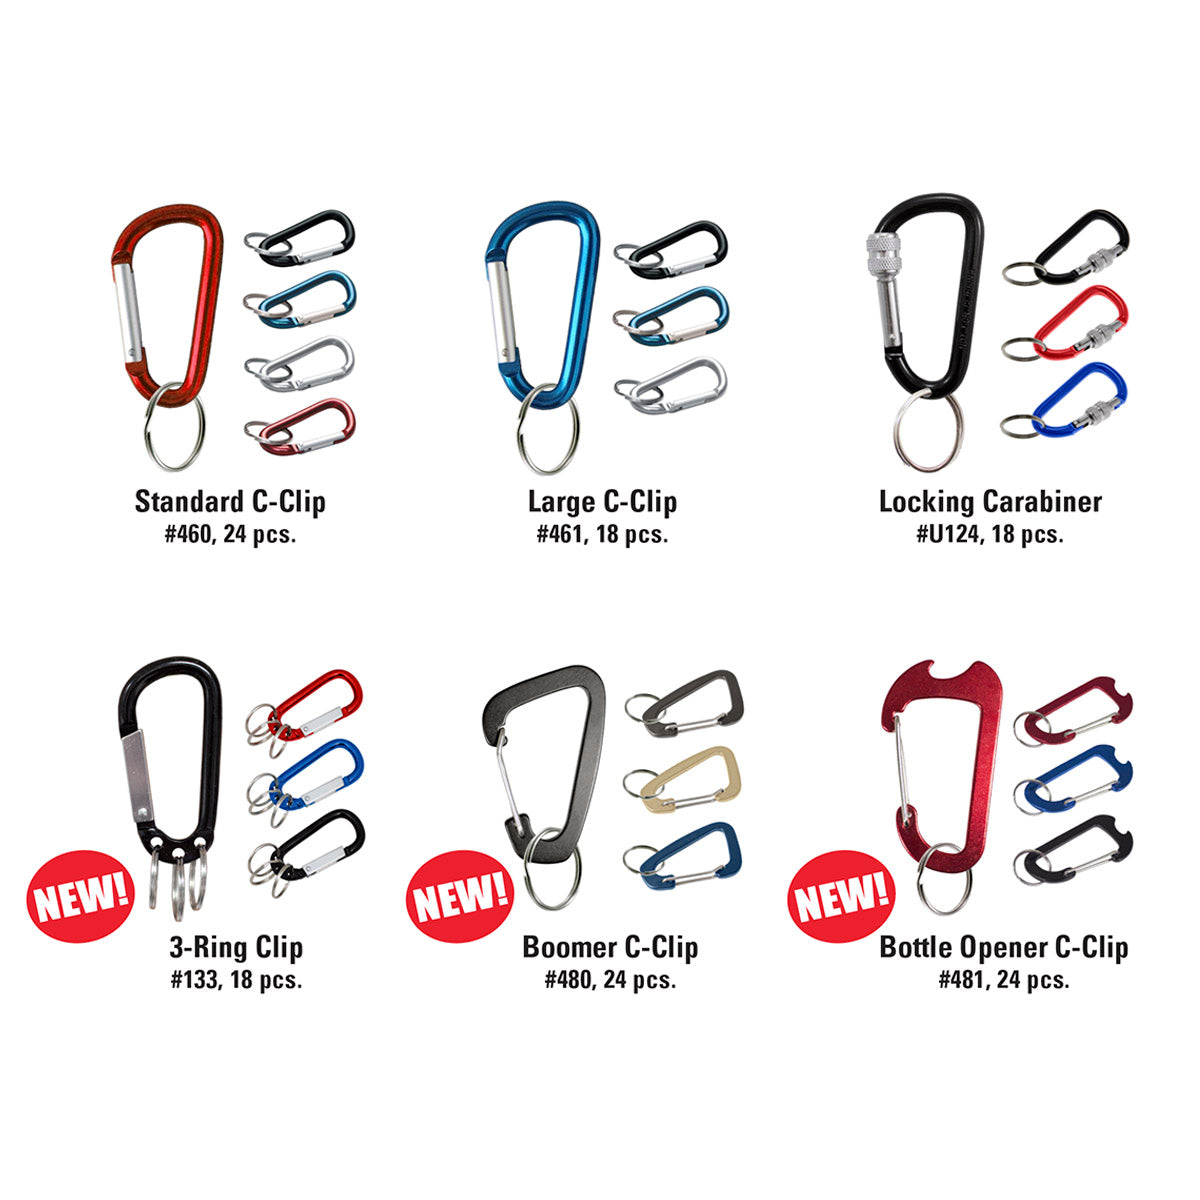 Carabiner Keychain Display, Retail Solutions